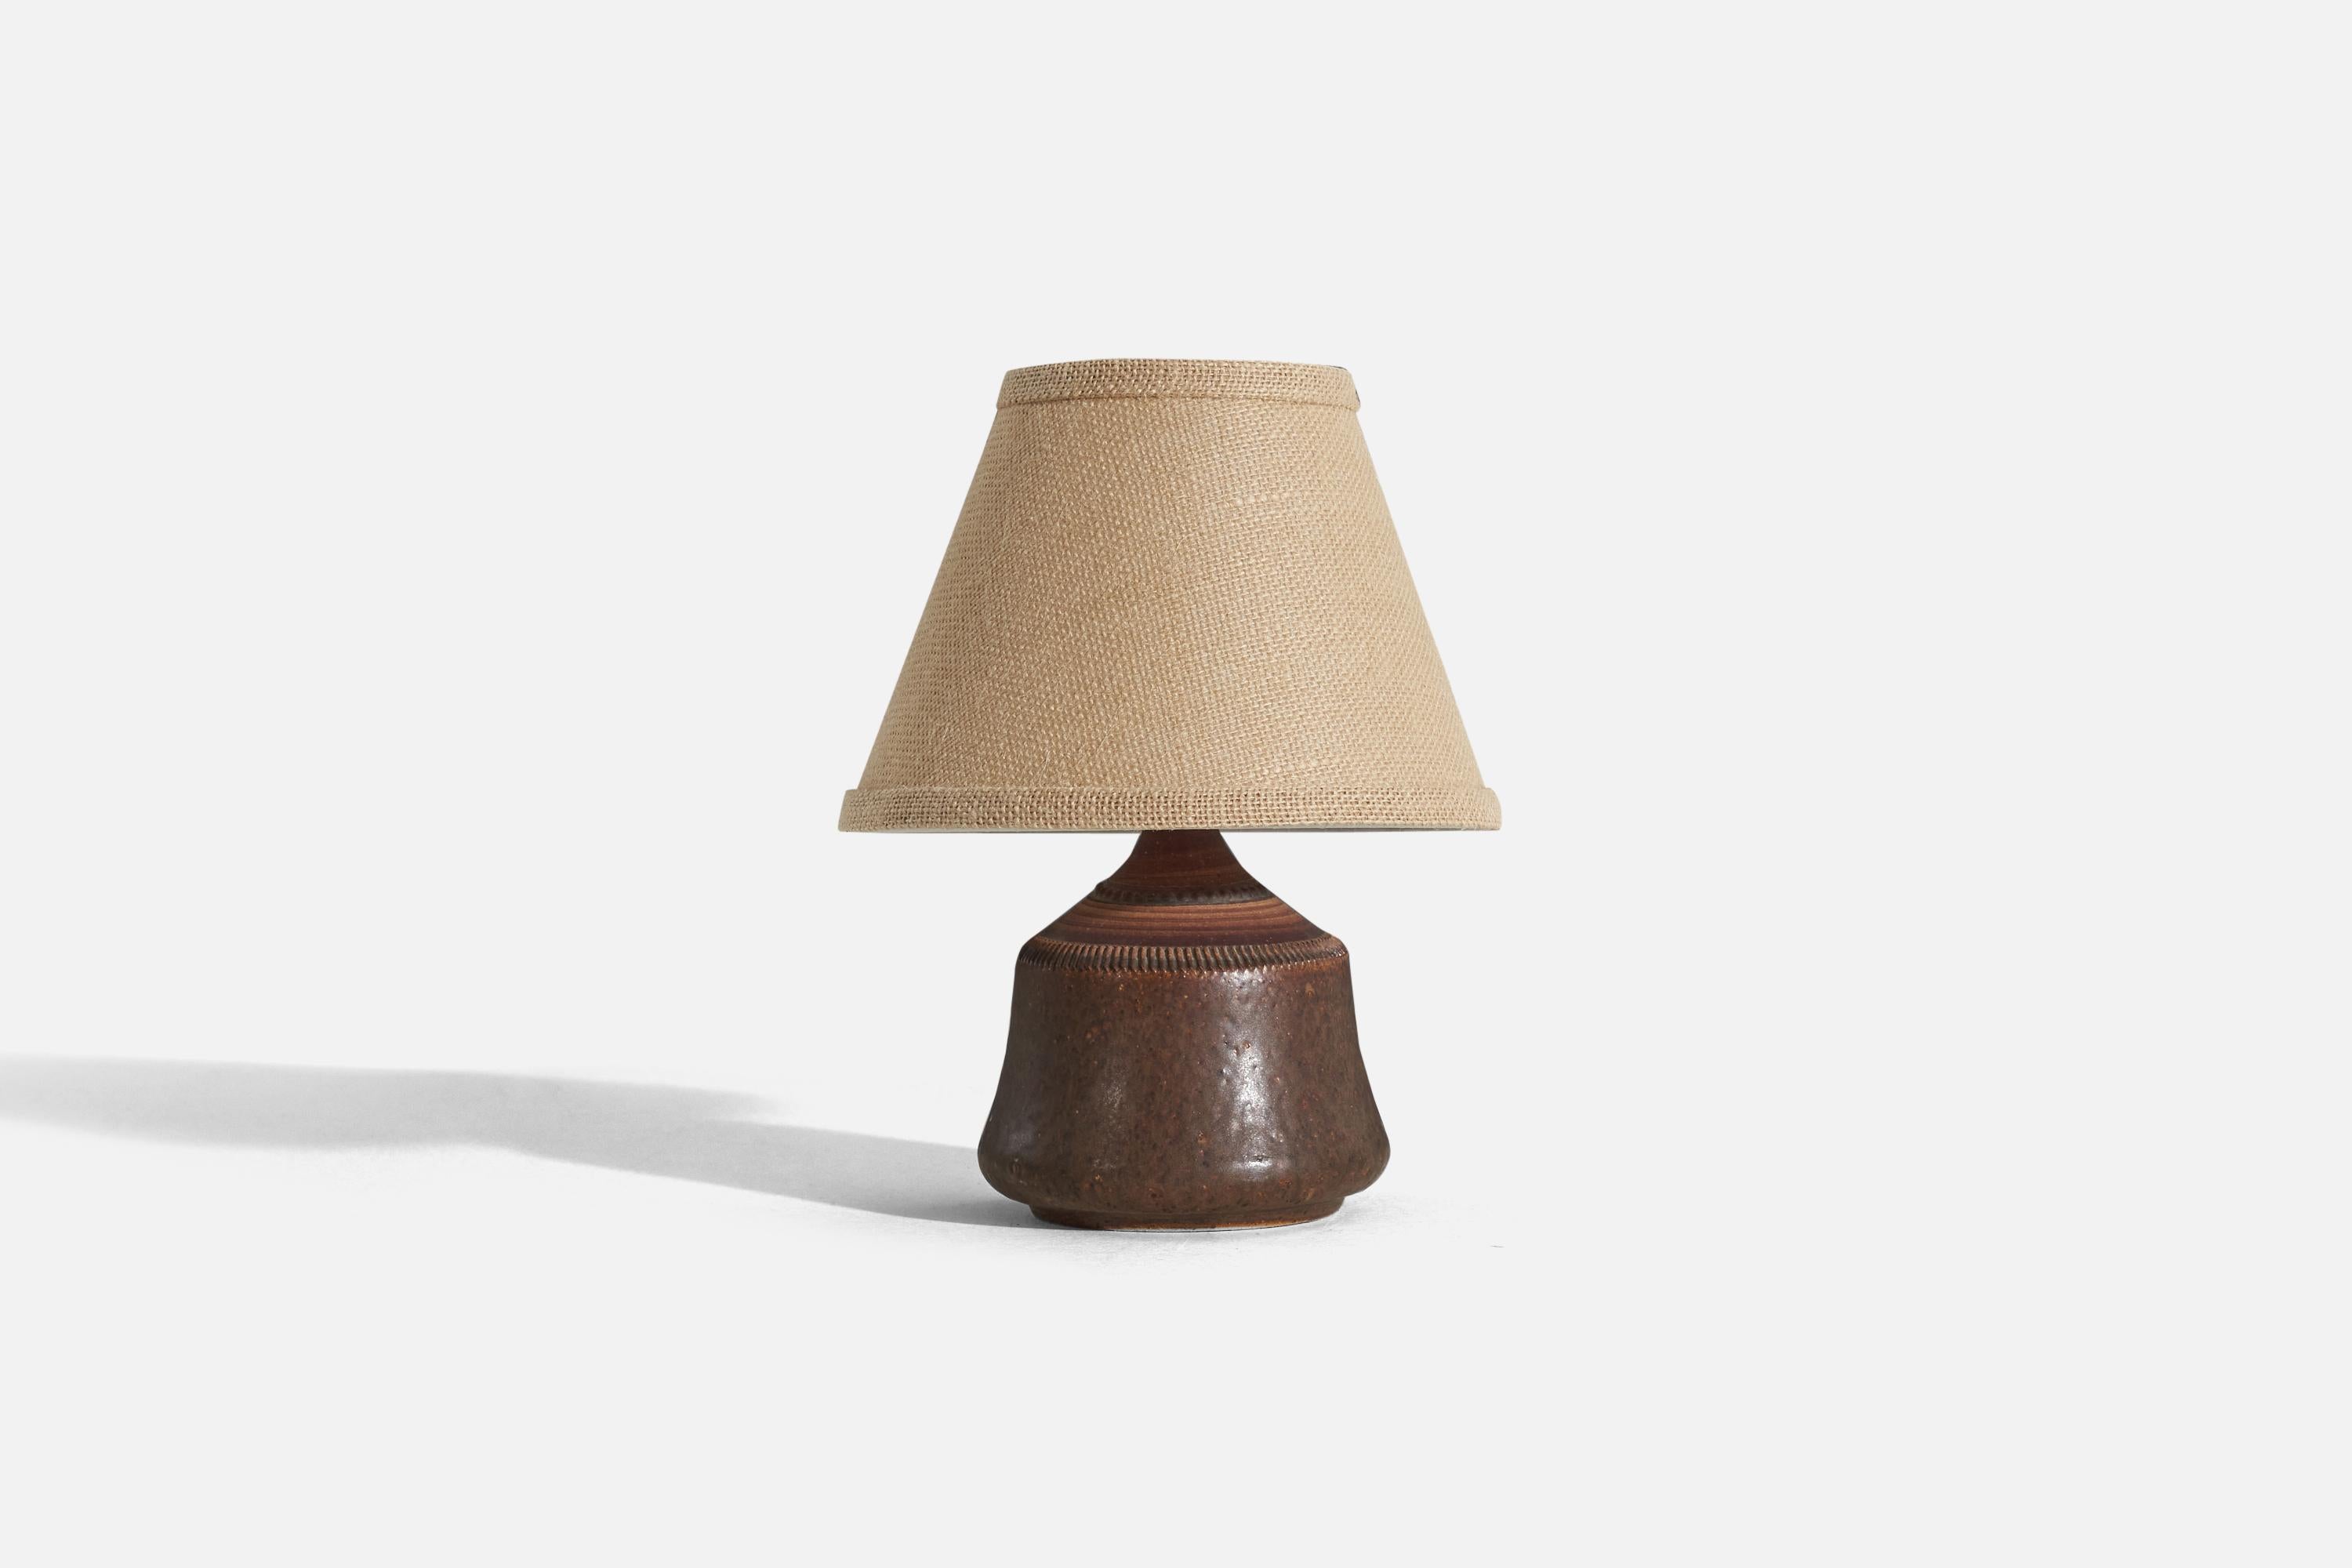 A brown, glazed stoneware table lamp designed and produced by Klase Höganäs, Sweden, 1960s. 

Sold without lampshade. 
Dimensions of Lamp (inches) : 7.375 x 5.125 x 5.125 (H x W x D)
Dimensions of Shade (inches) : 4.25 x 8.25 x 6 (T x B x